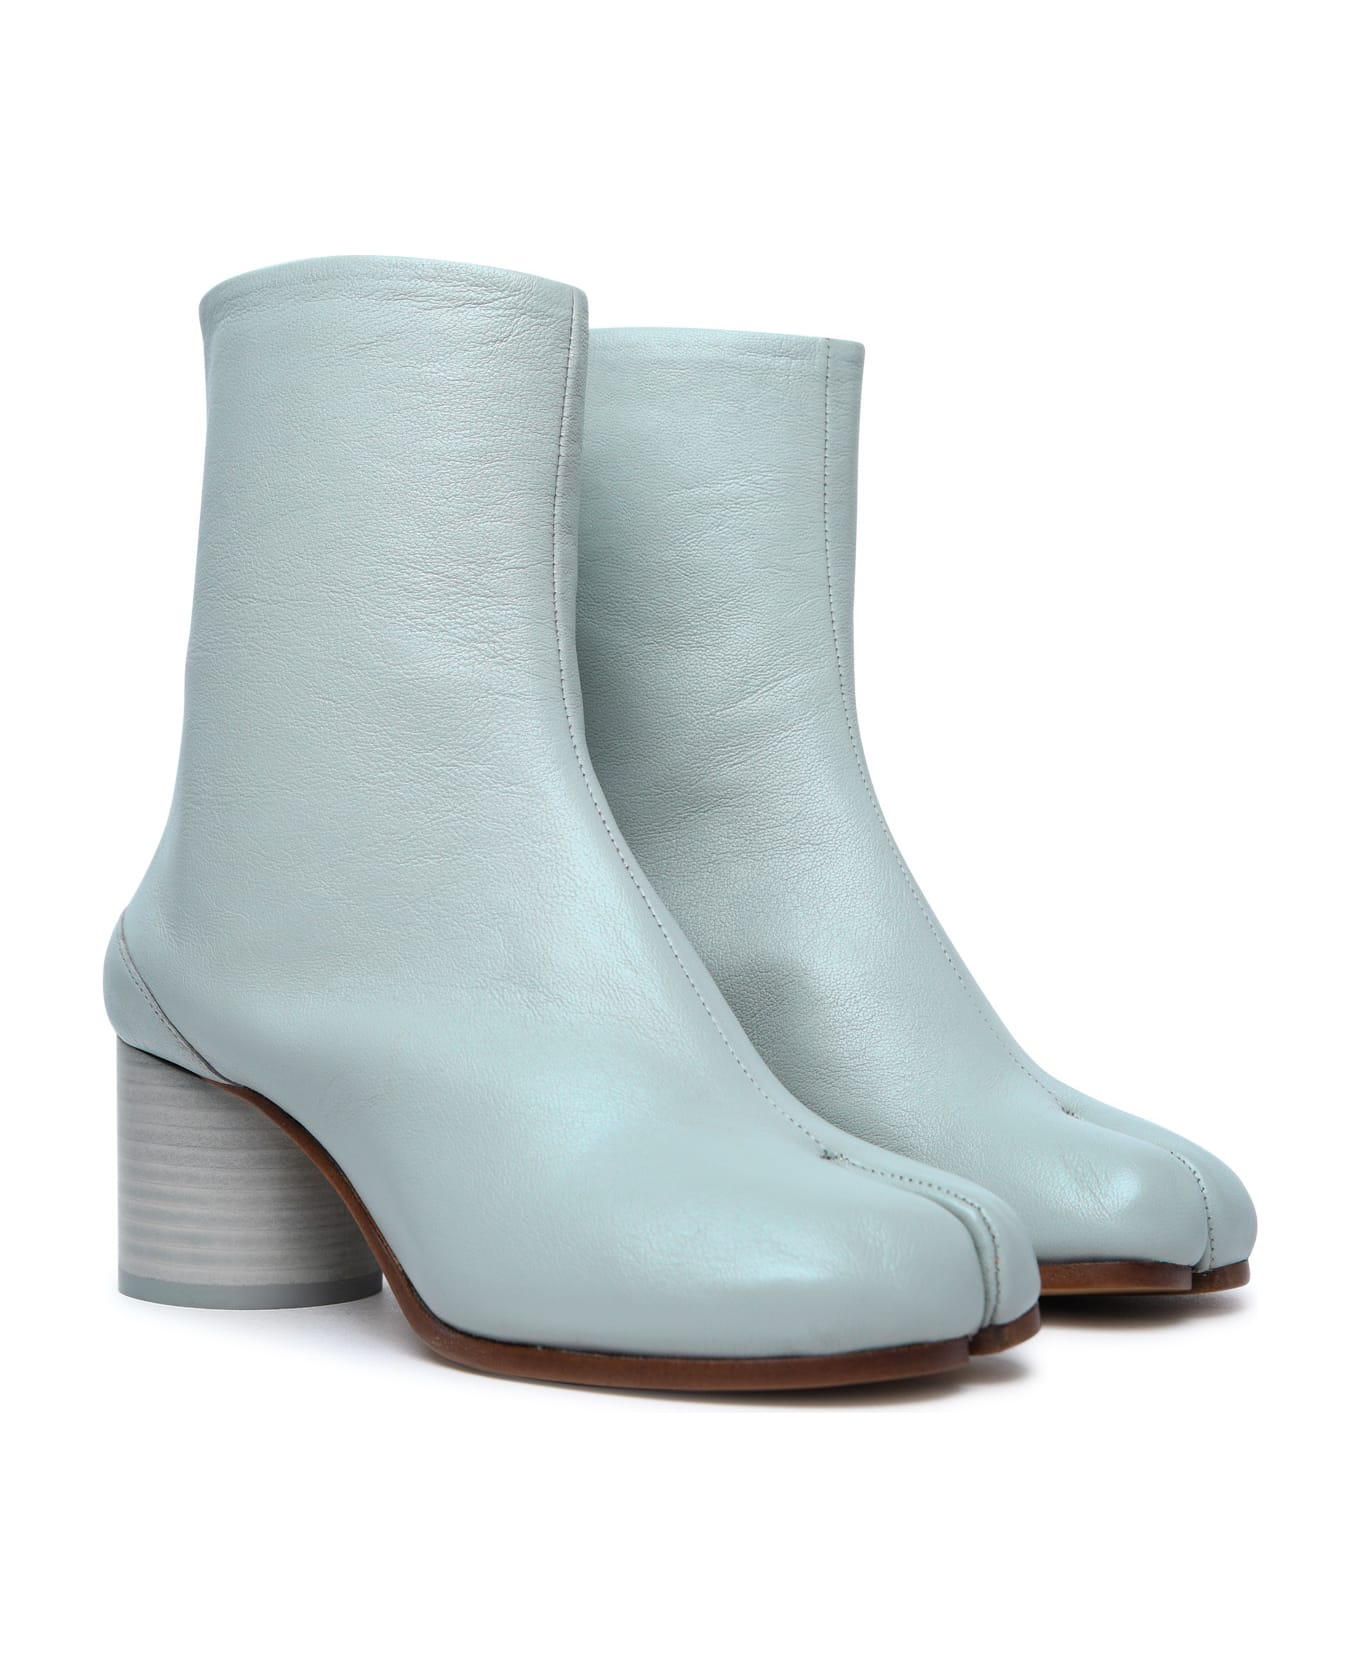 Maison Margiela 'tabi' Green Anise Leather Ankle Boots - Anisette ブーツ